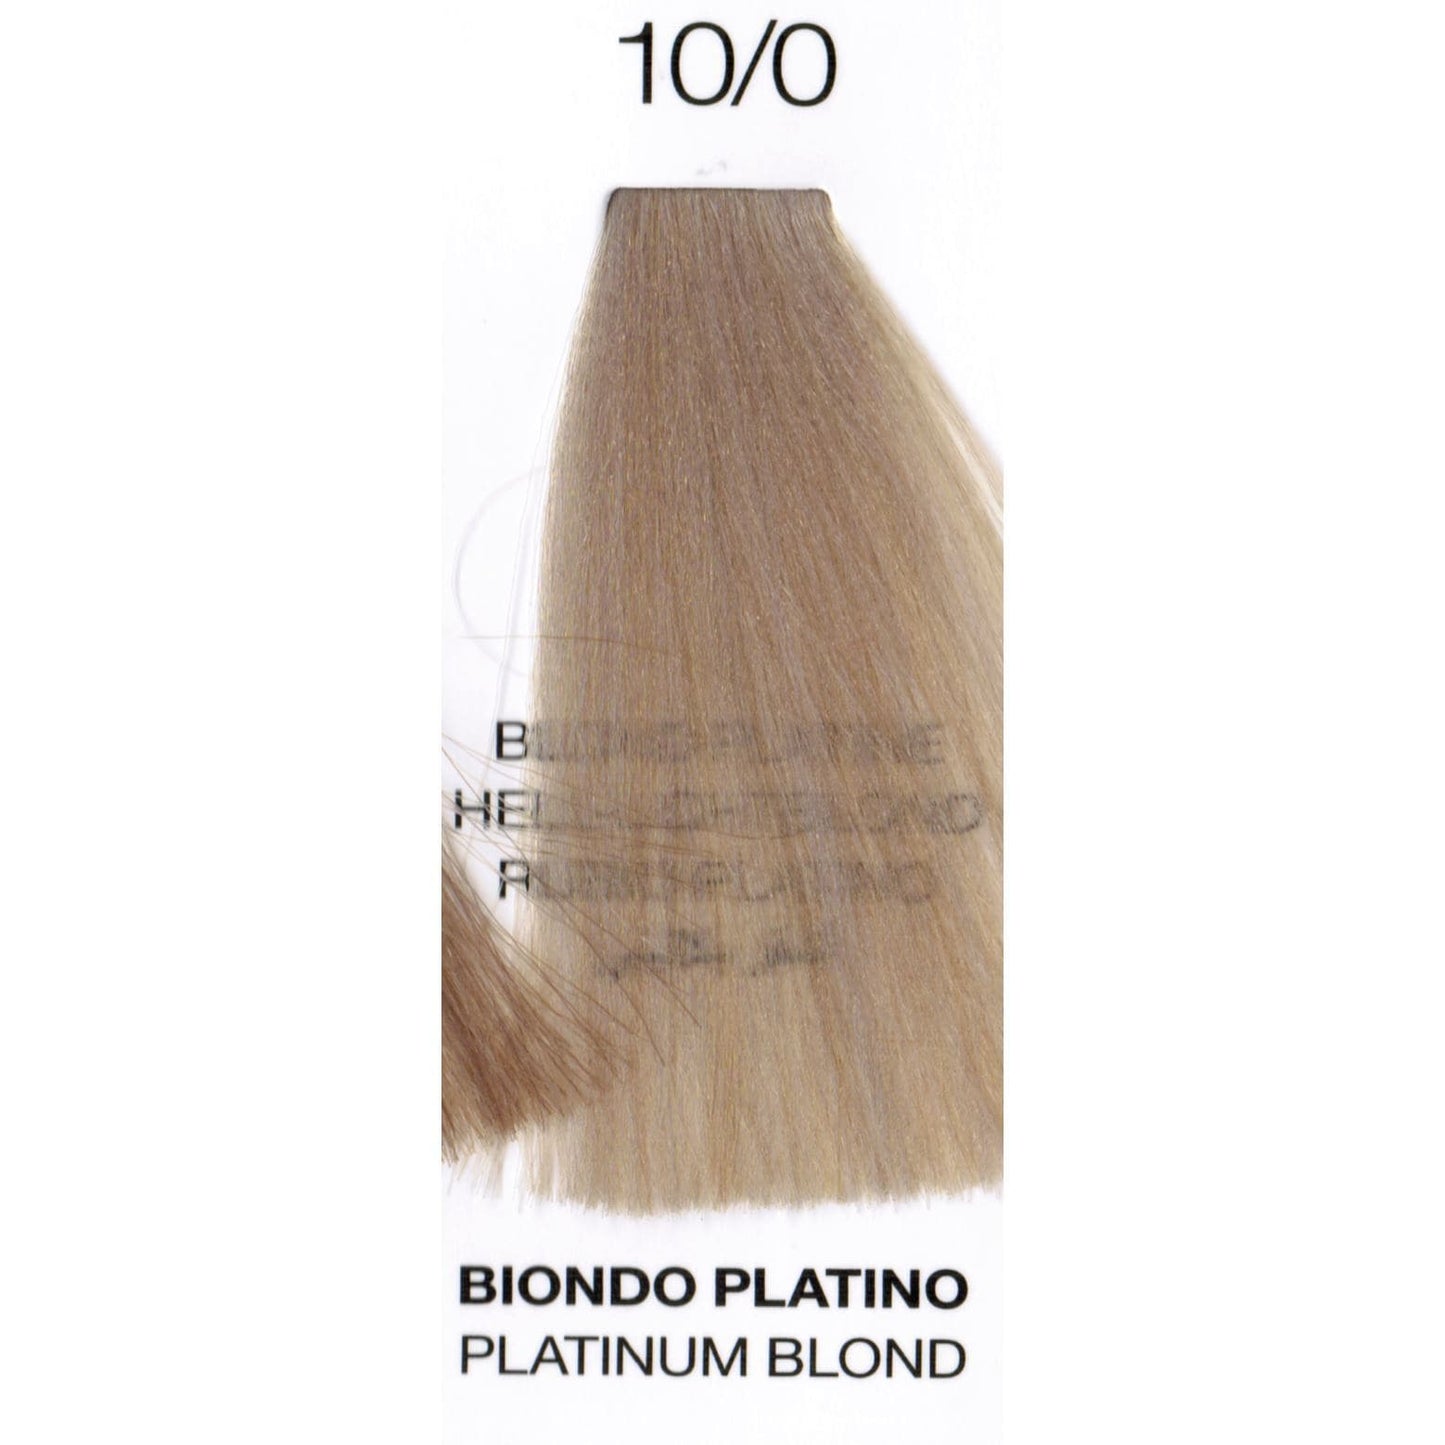 10/0 Platinum Blonde | Ammonia-Free Permanent Hair Color | Purity | OYSTER - SH Salons